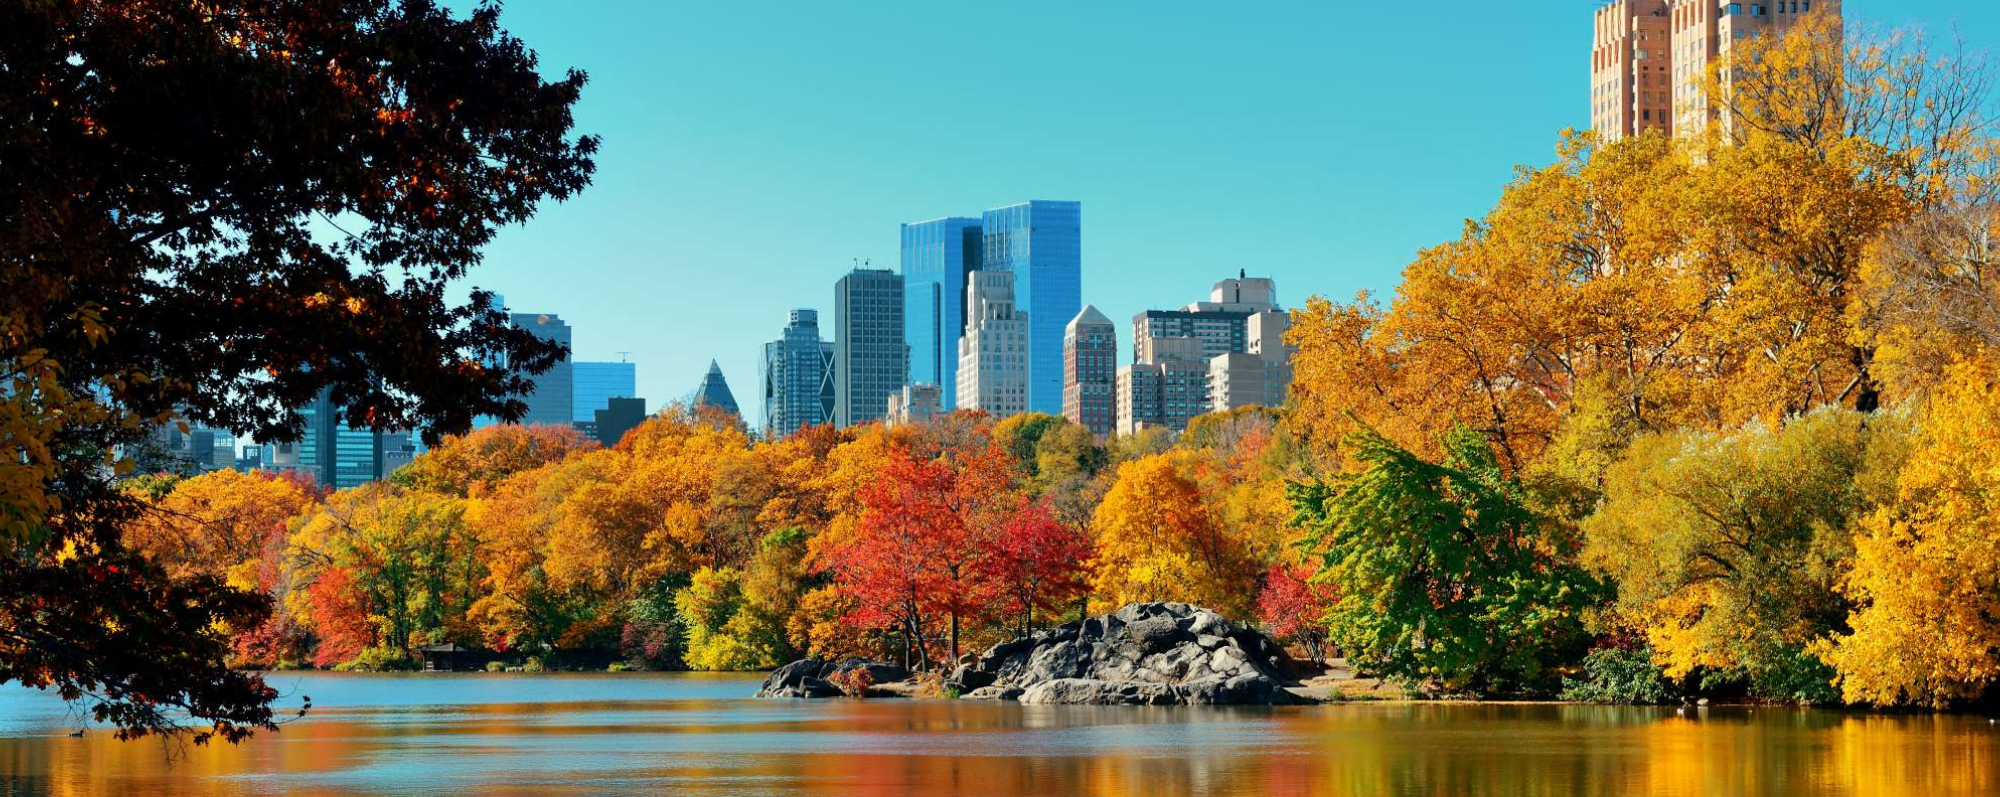 Central Park pond and rock surrounded by fall foliage with skyscrapers in the background